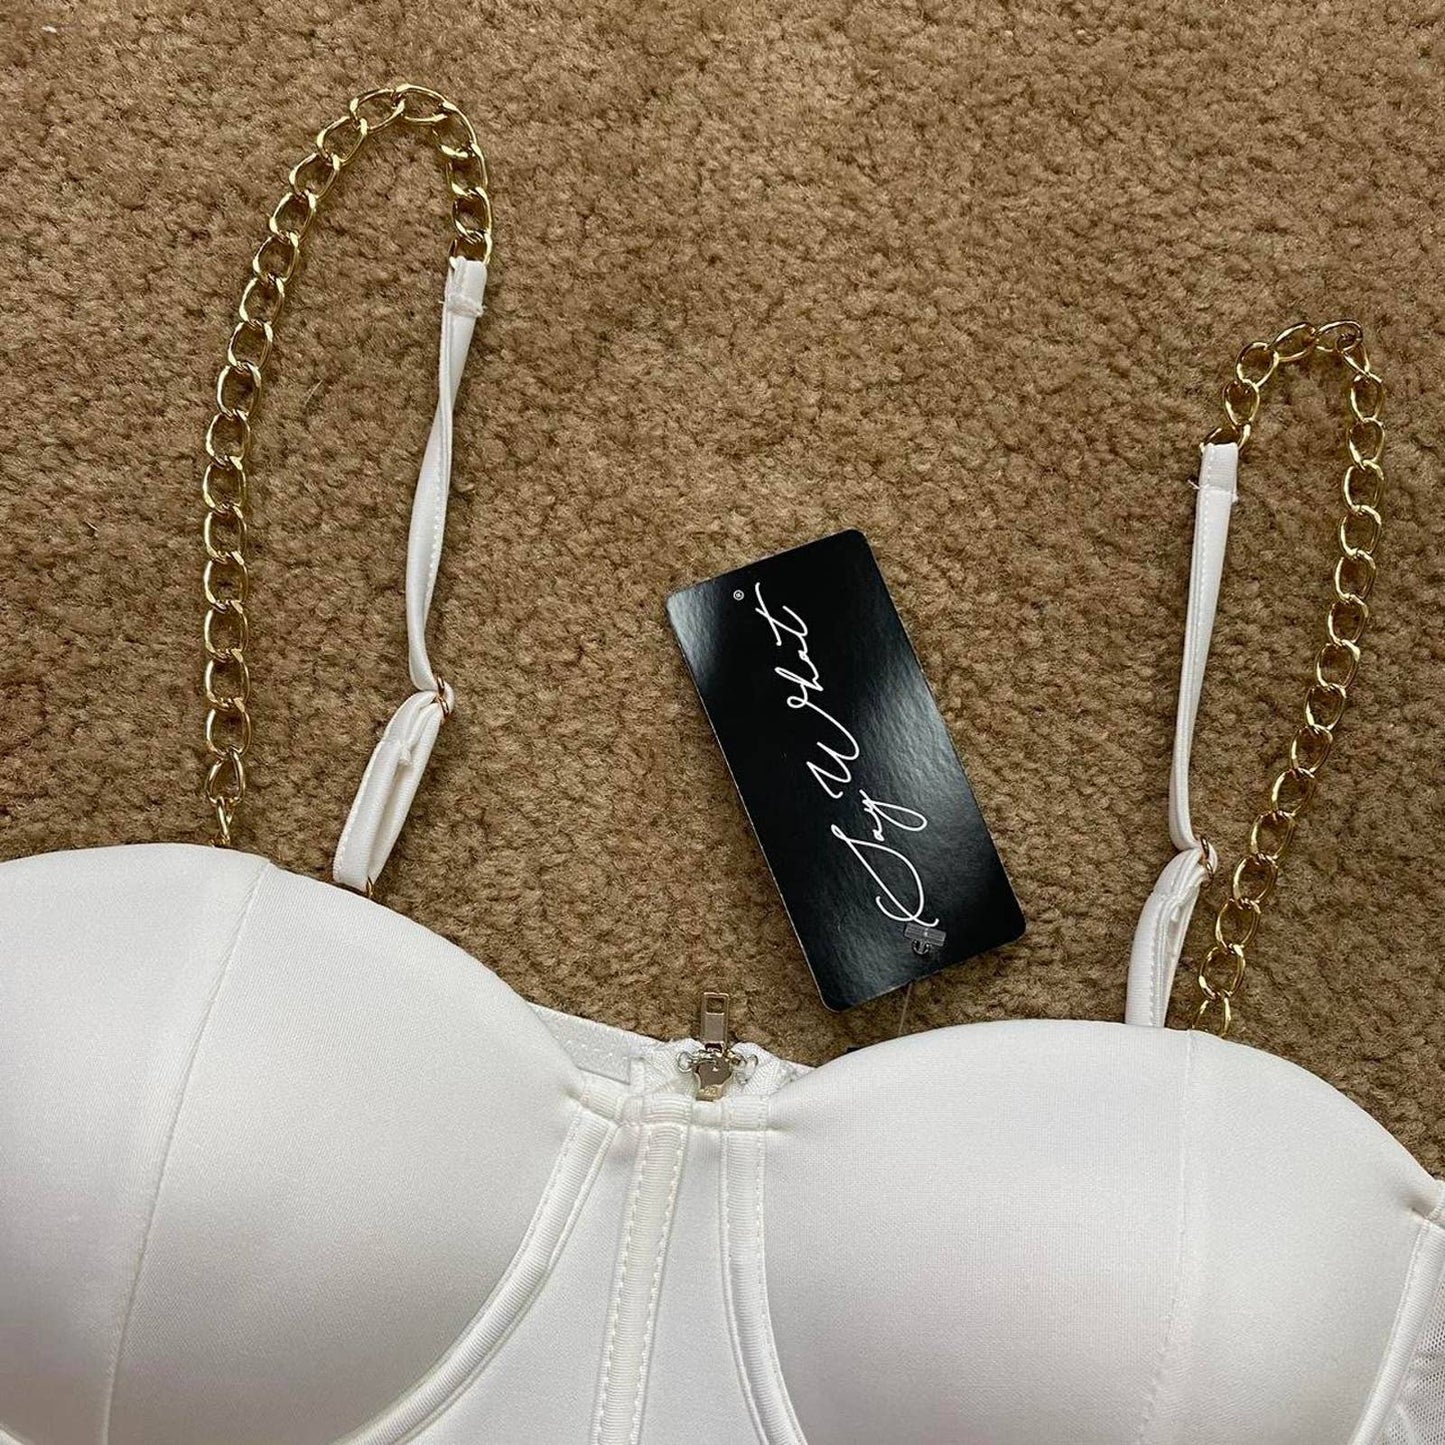 Preowned Say What White Bustier Crop Top, Size Medium